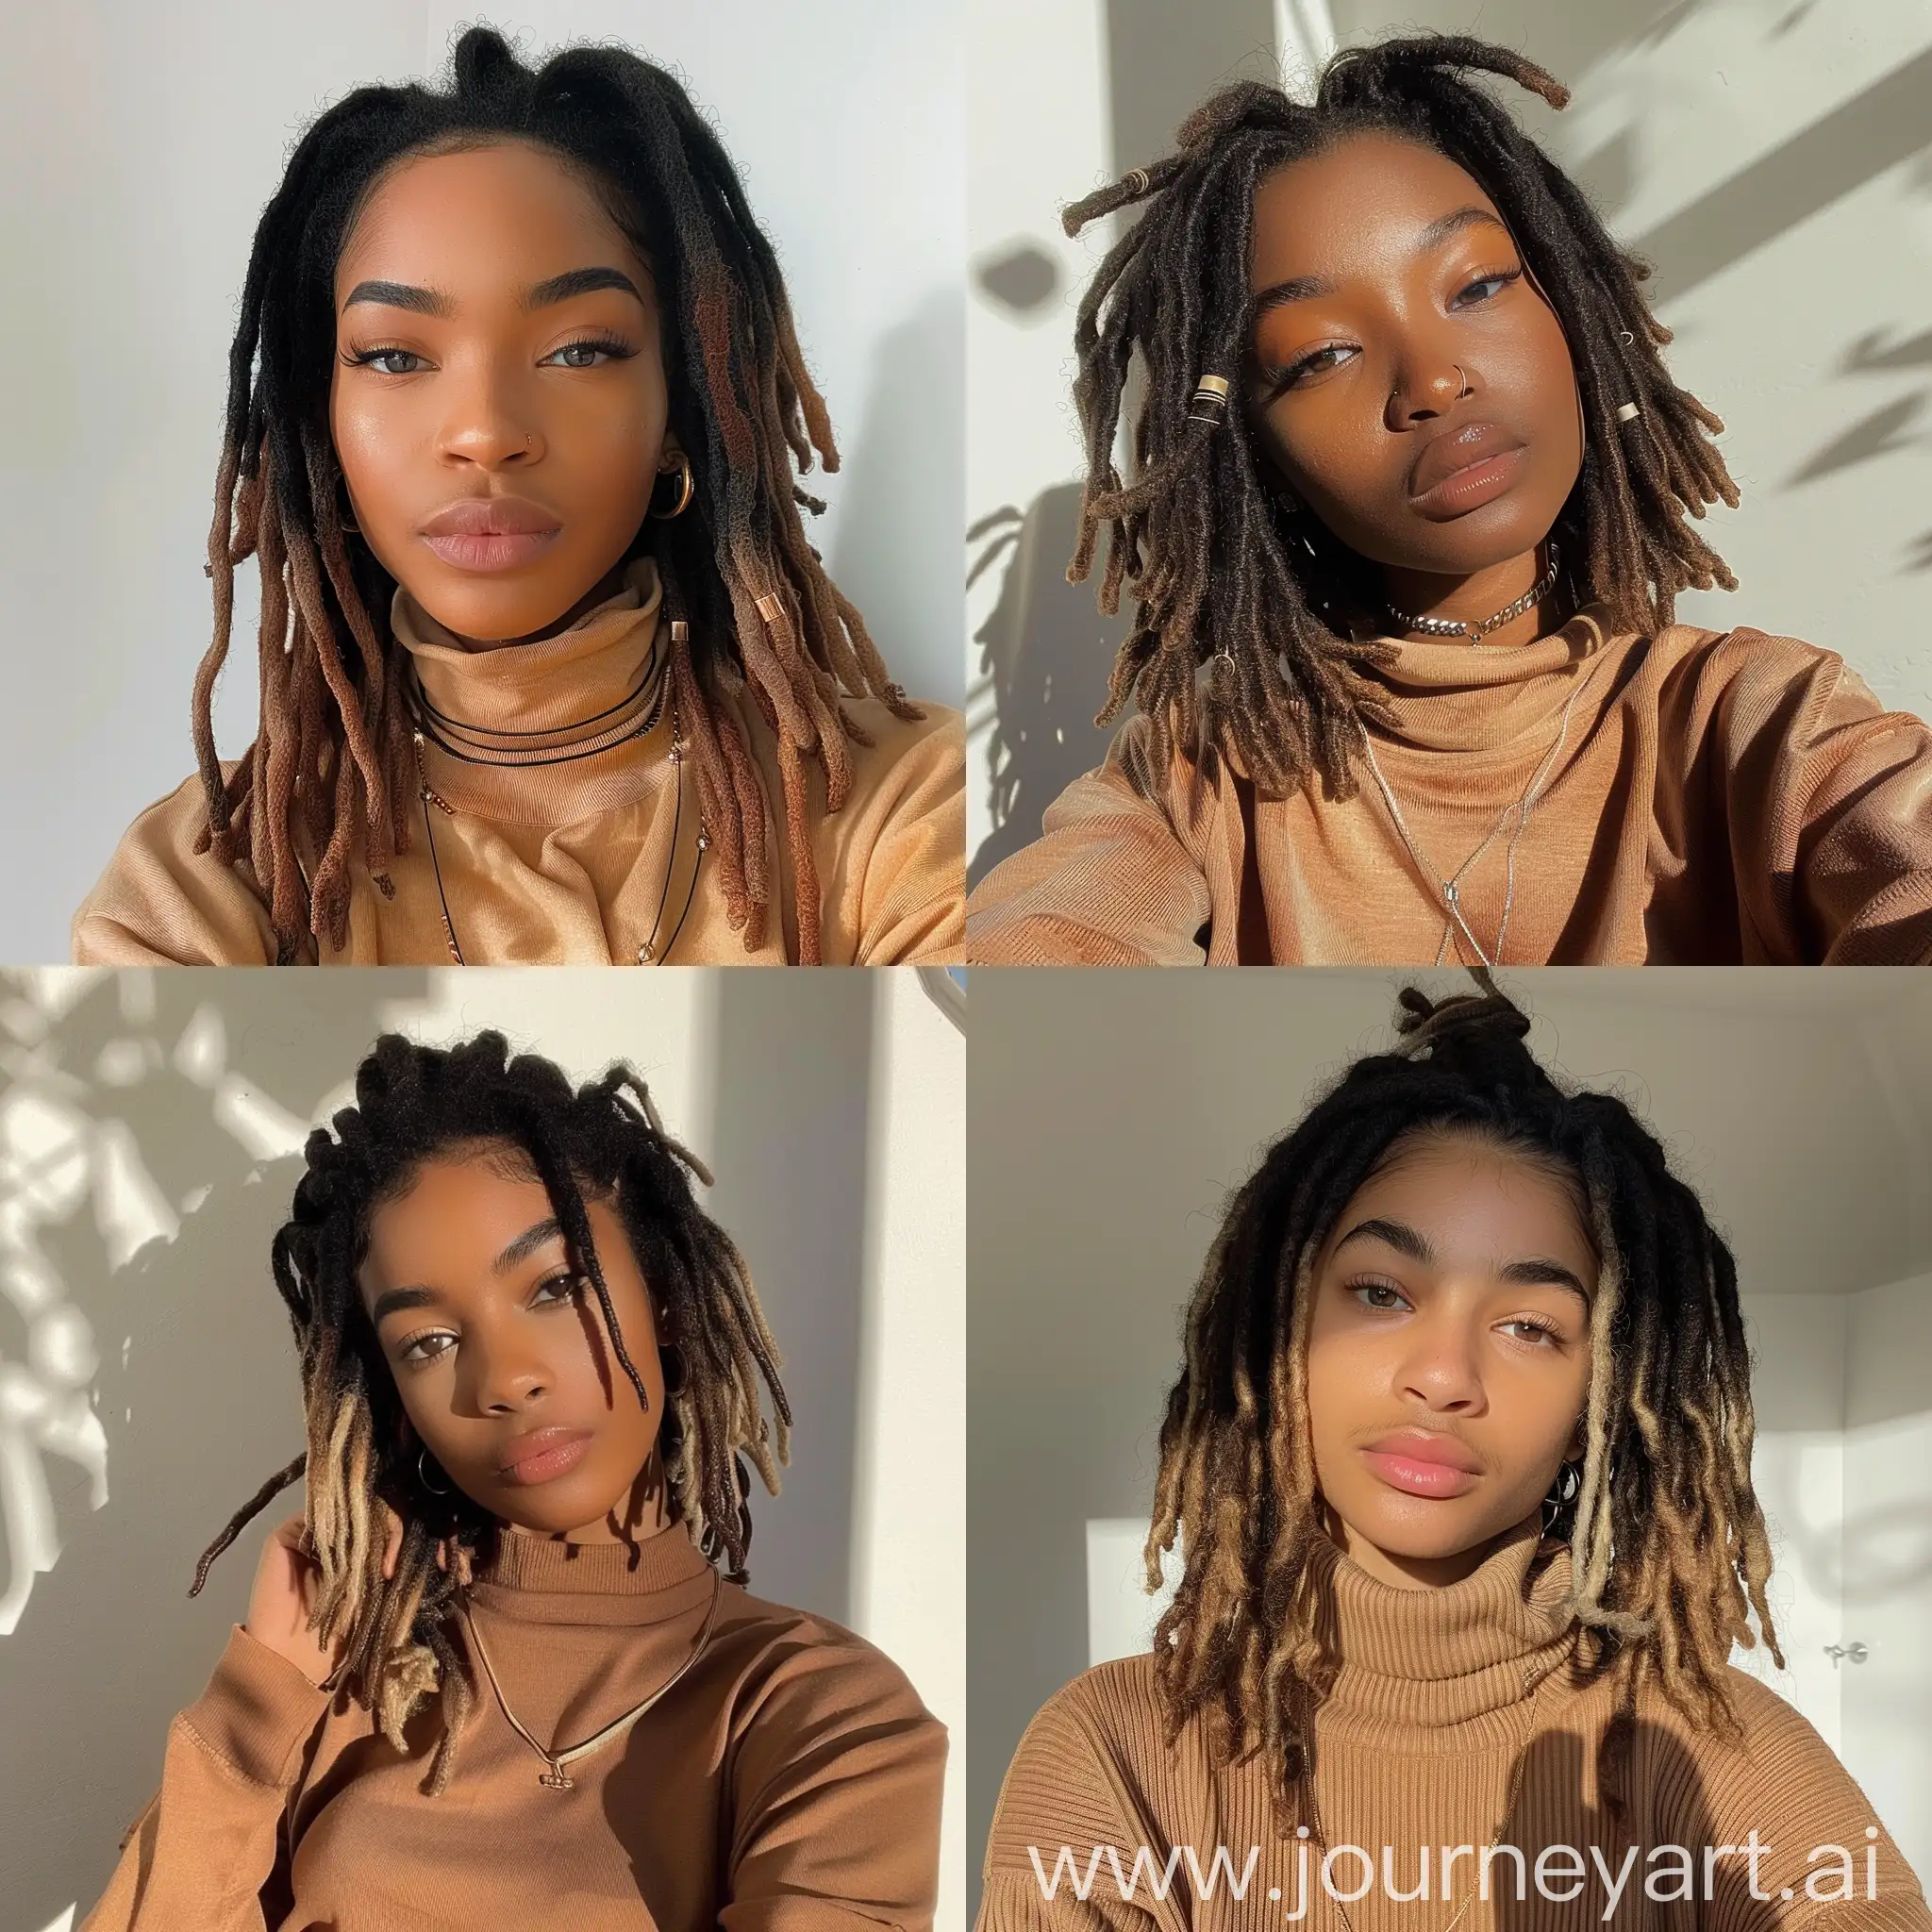 Stylish-Black-Teenage-Influencer-with-Ombre-Dreadlocks-in-Soft-Brown-Tones-Selfie